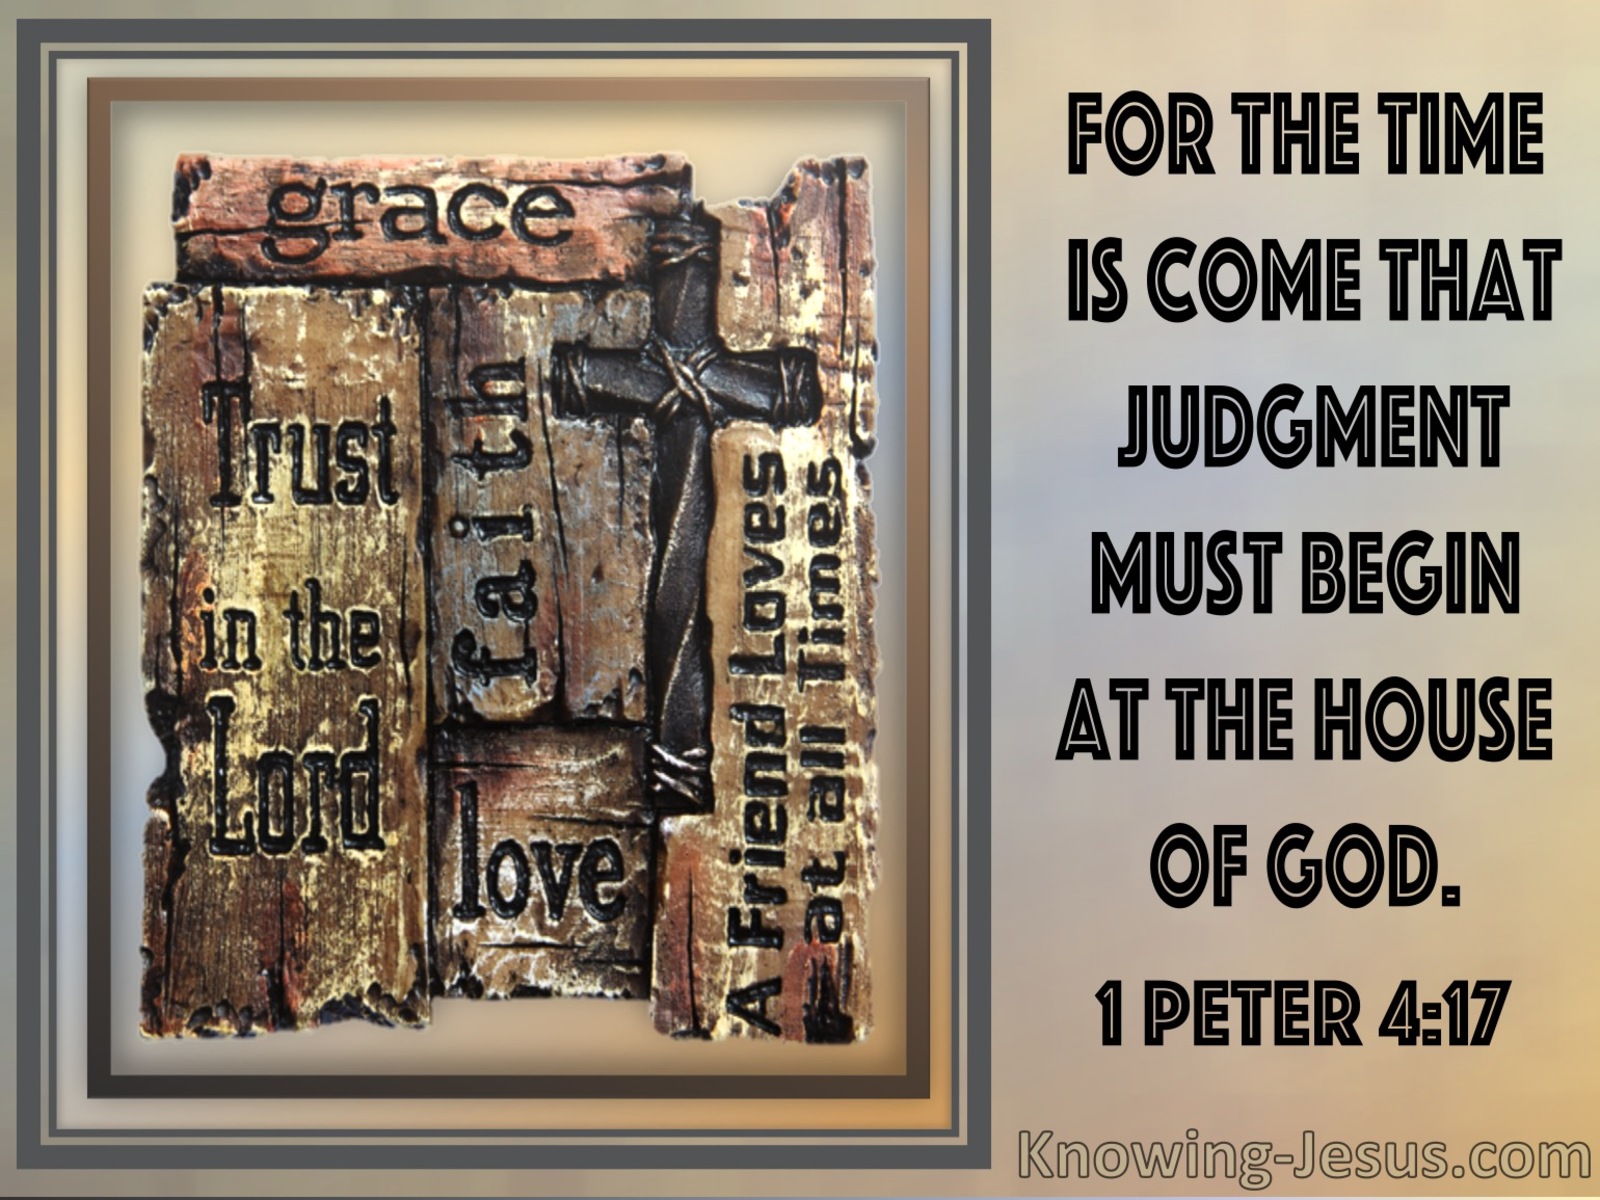 1 Peter 4:17 The Time Is Come that Judgement Must Begin At The House Of God (utmost)05:05